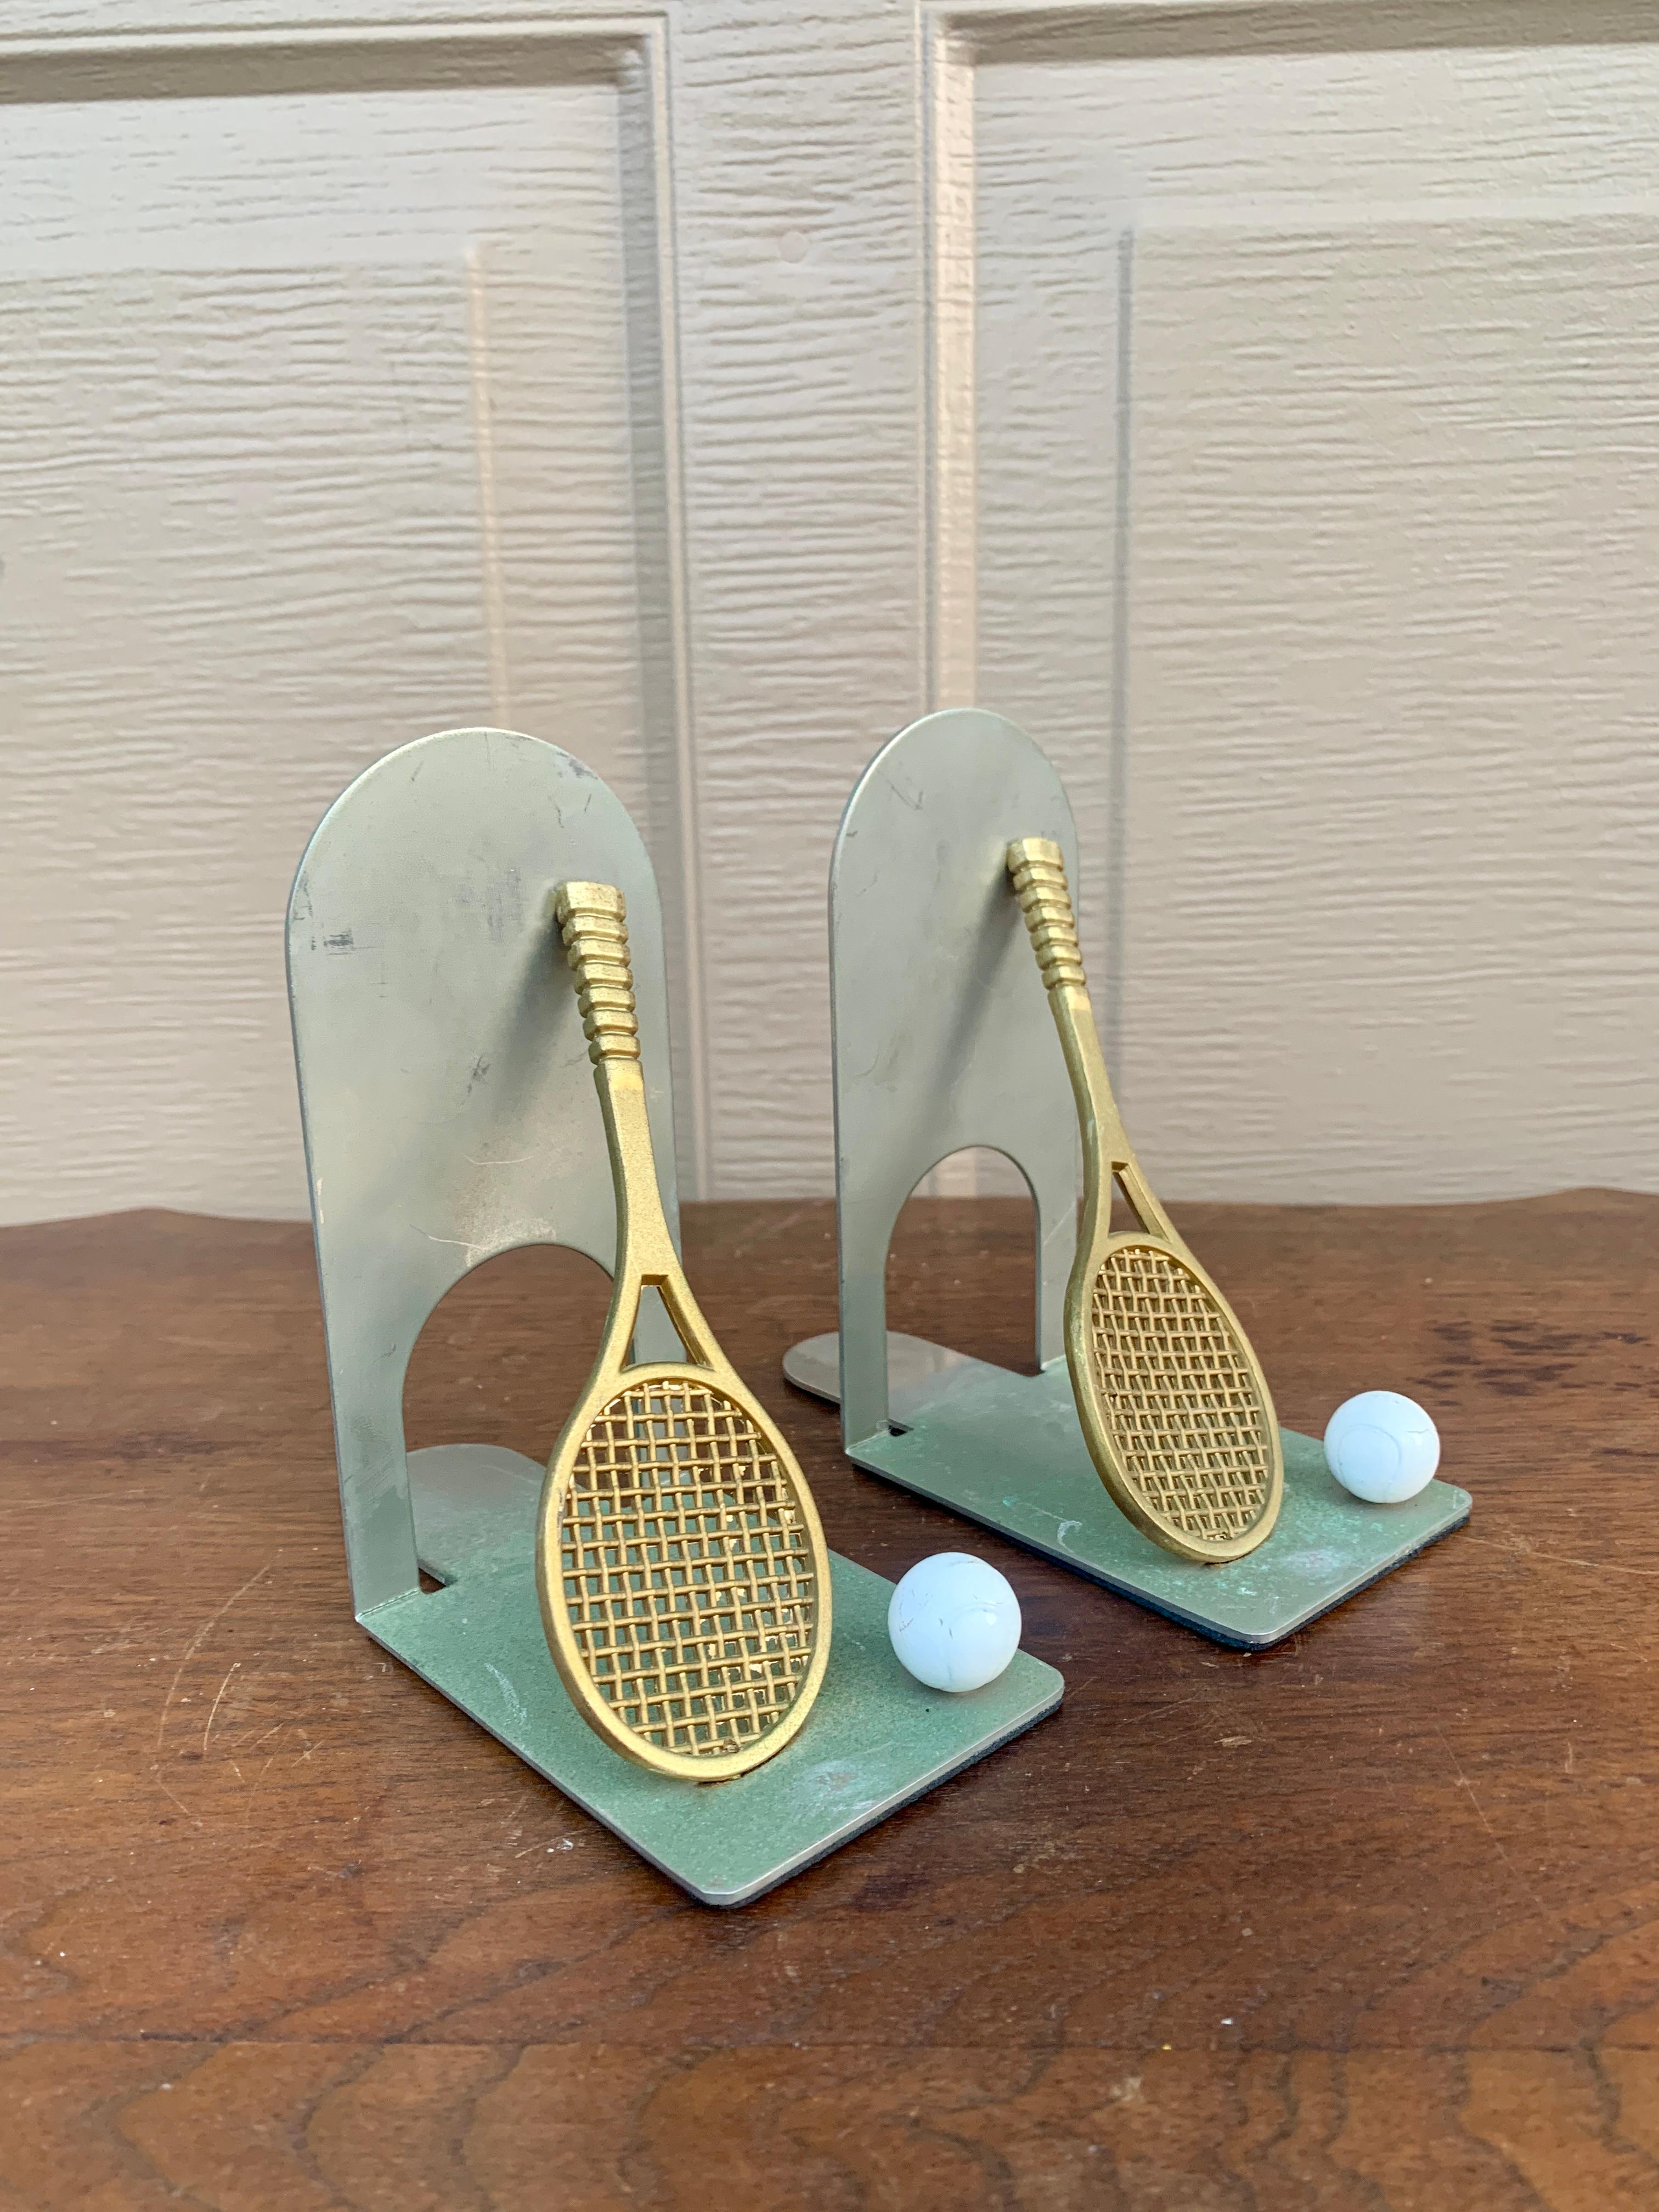 A beautiful pair of cast brass bookends in the form of two tennis rackets and tennis balls.

USA, Circa 1980s

Measures: 5.5